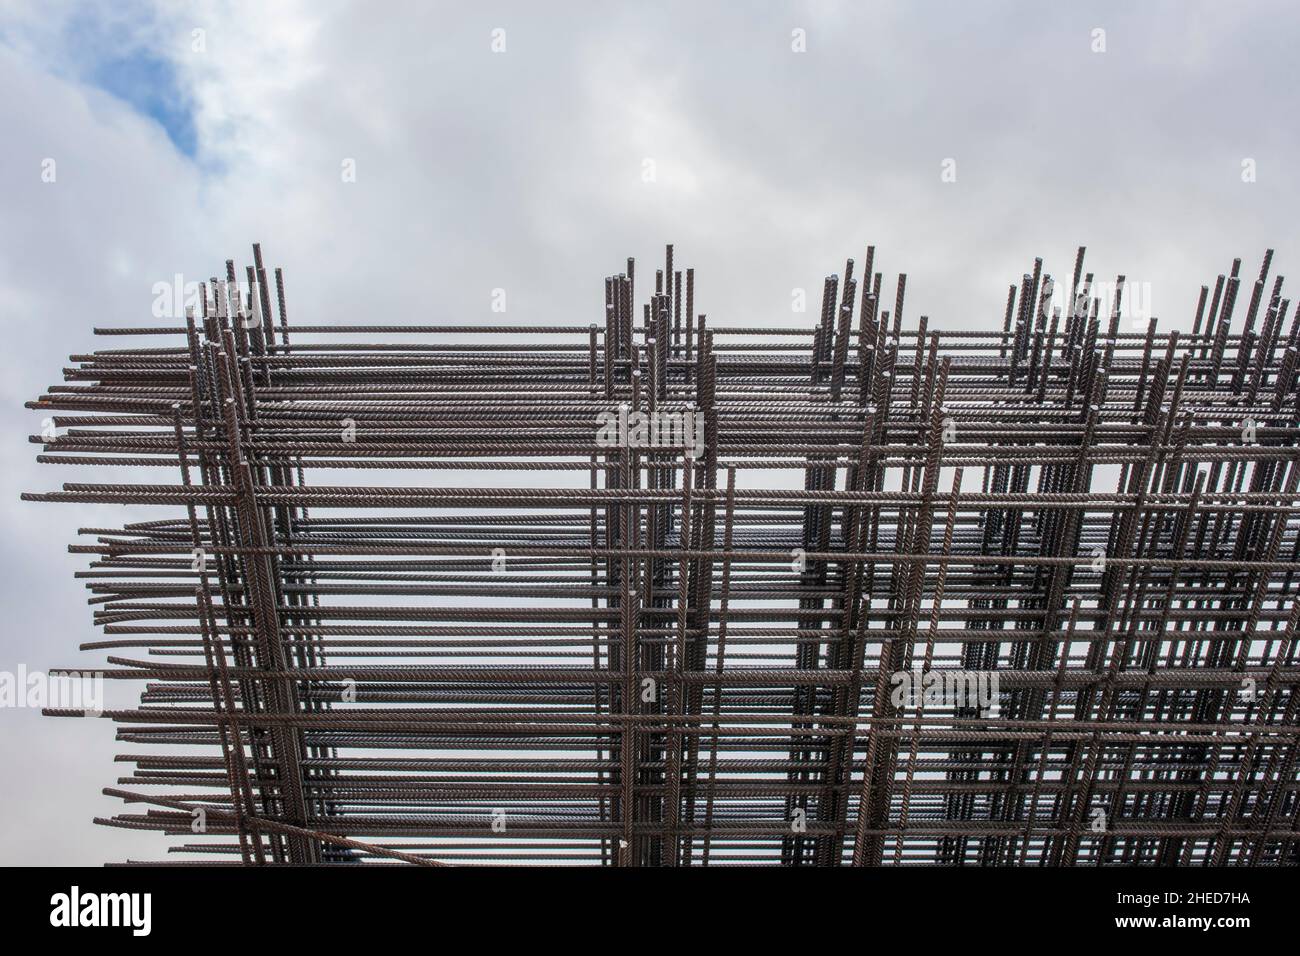 Reinforcing bars framework for armored concrete construction. Blue cloudy sky Stock Photo